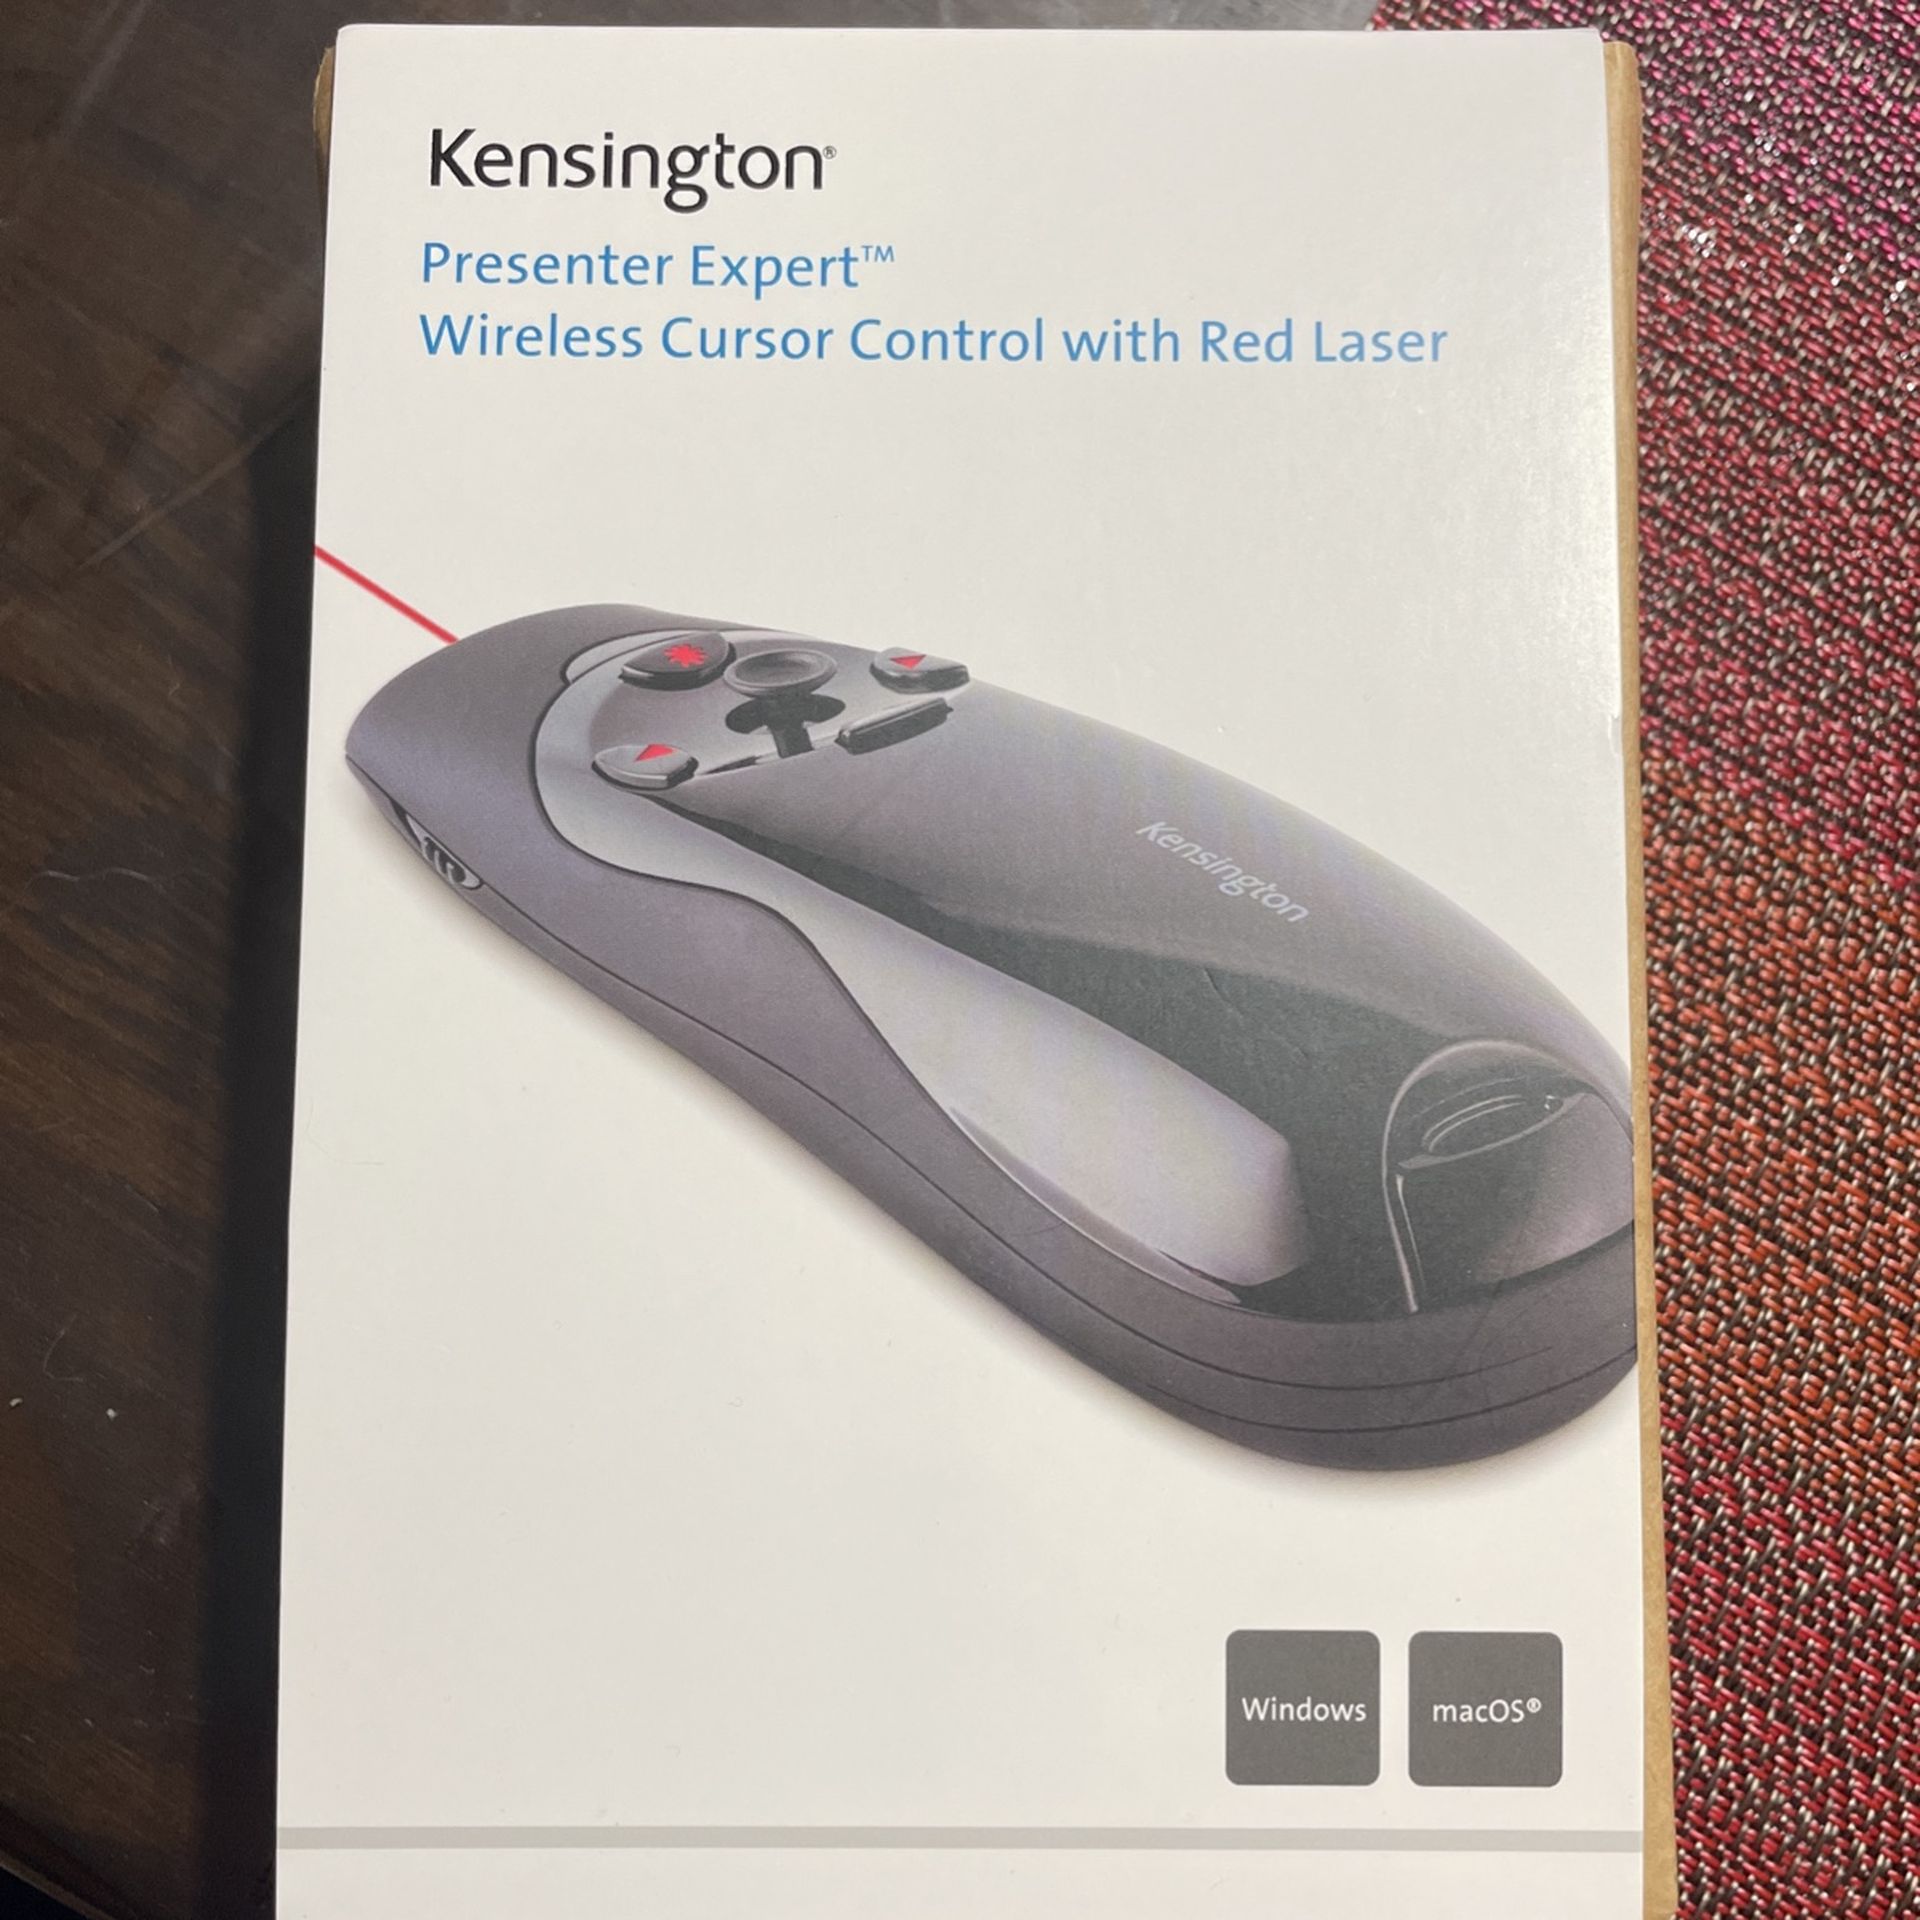 Wireless Cursor Control With Red Laser